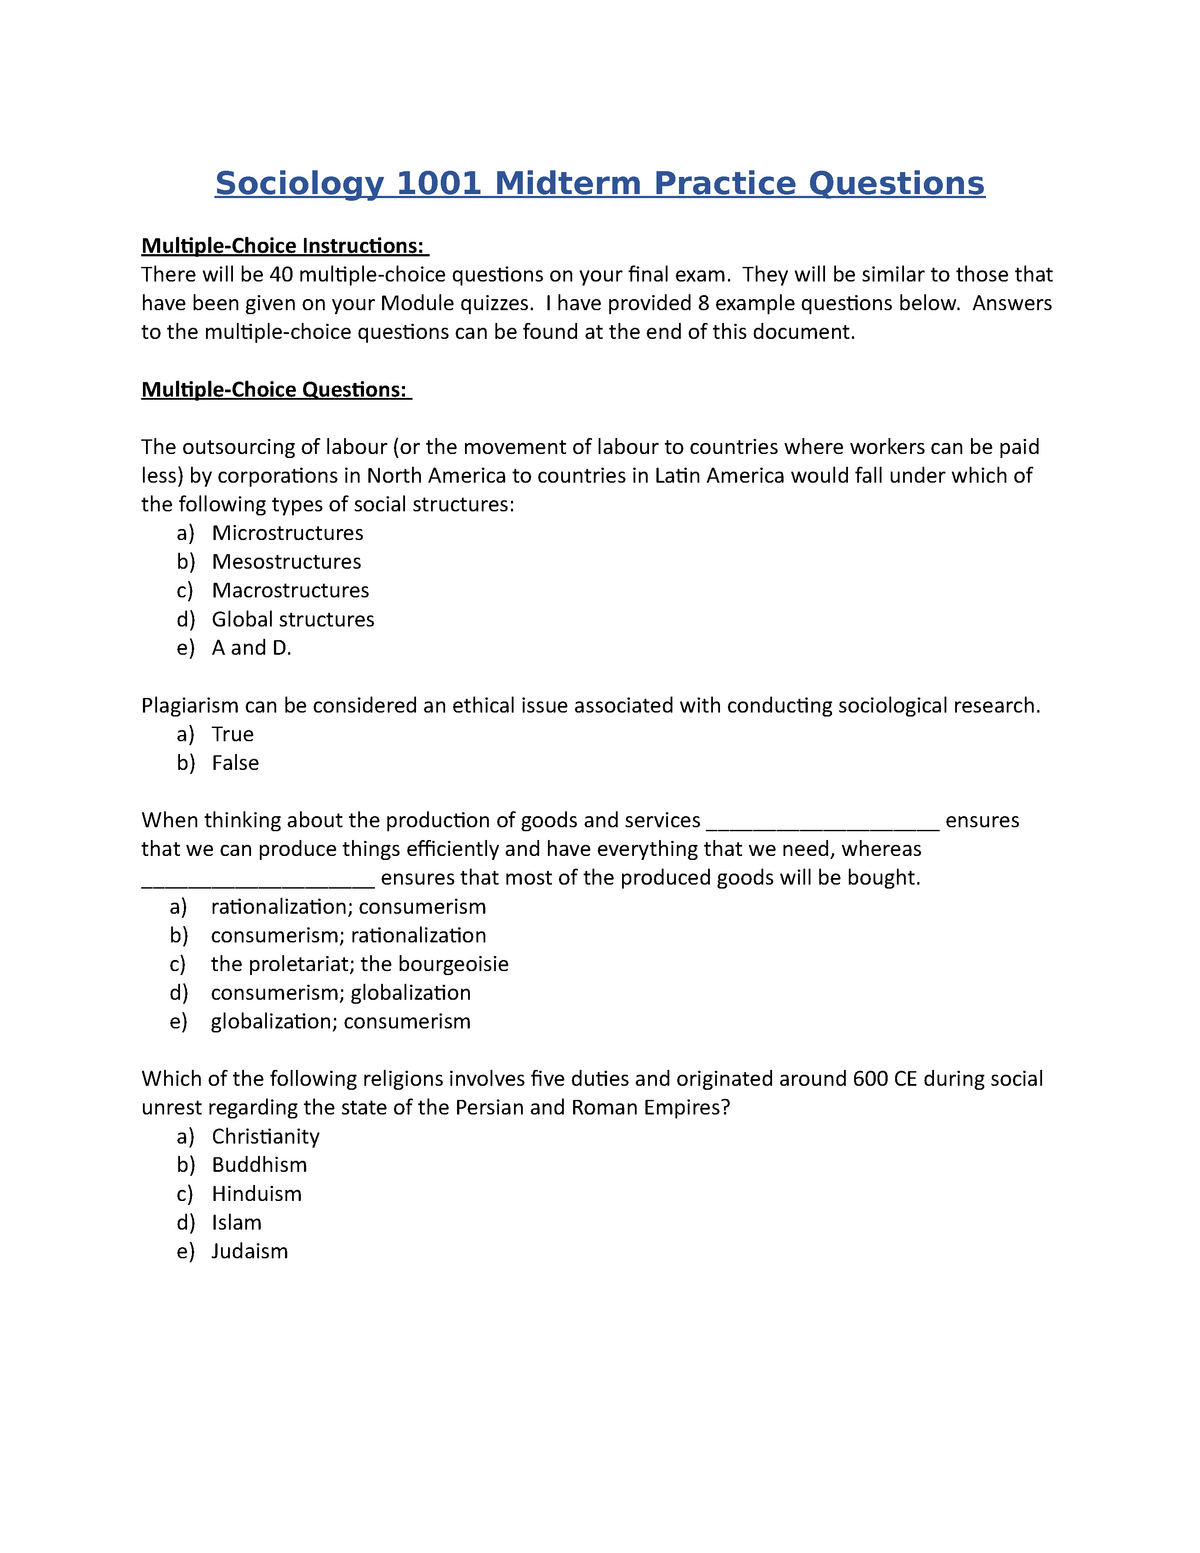 sample-practice-exam-questions-and-answers-sociology-1001-midterm